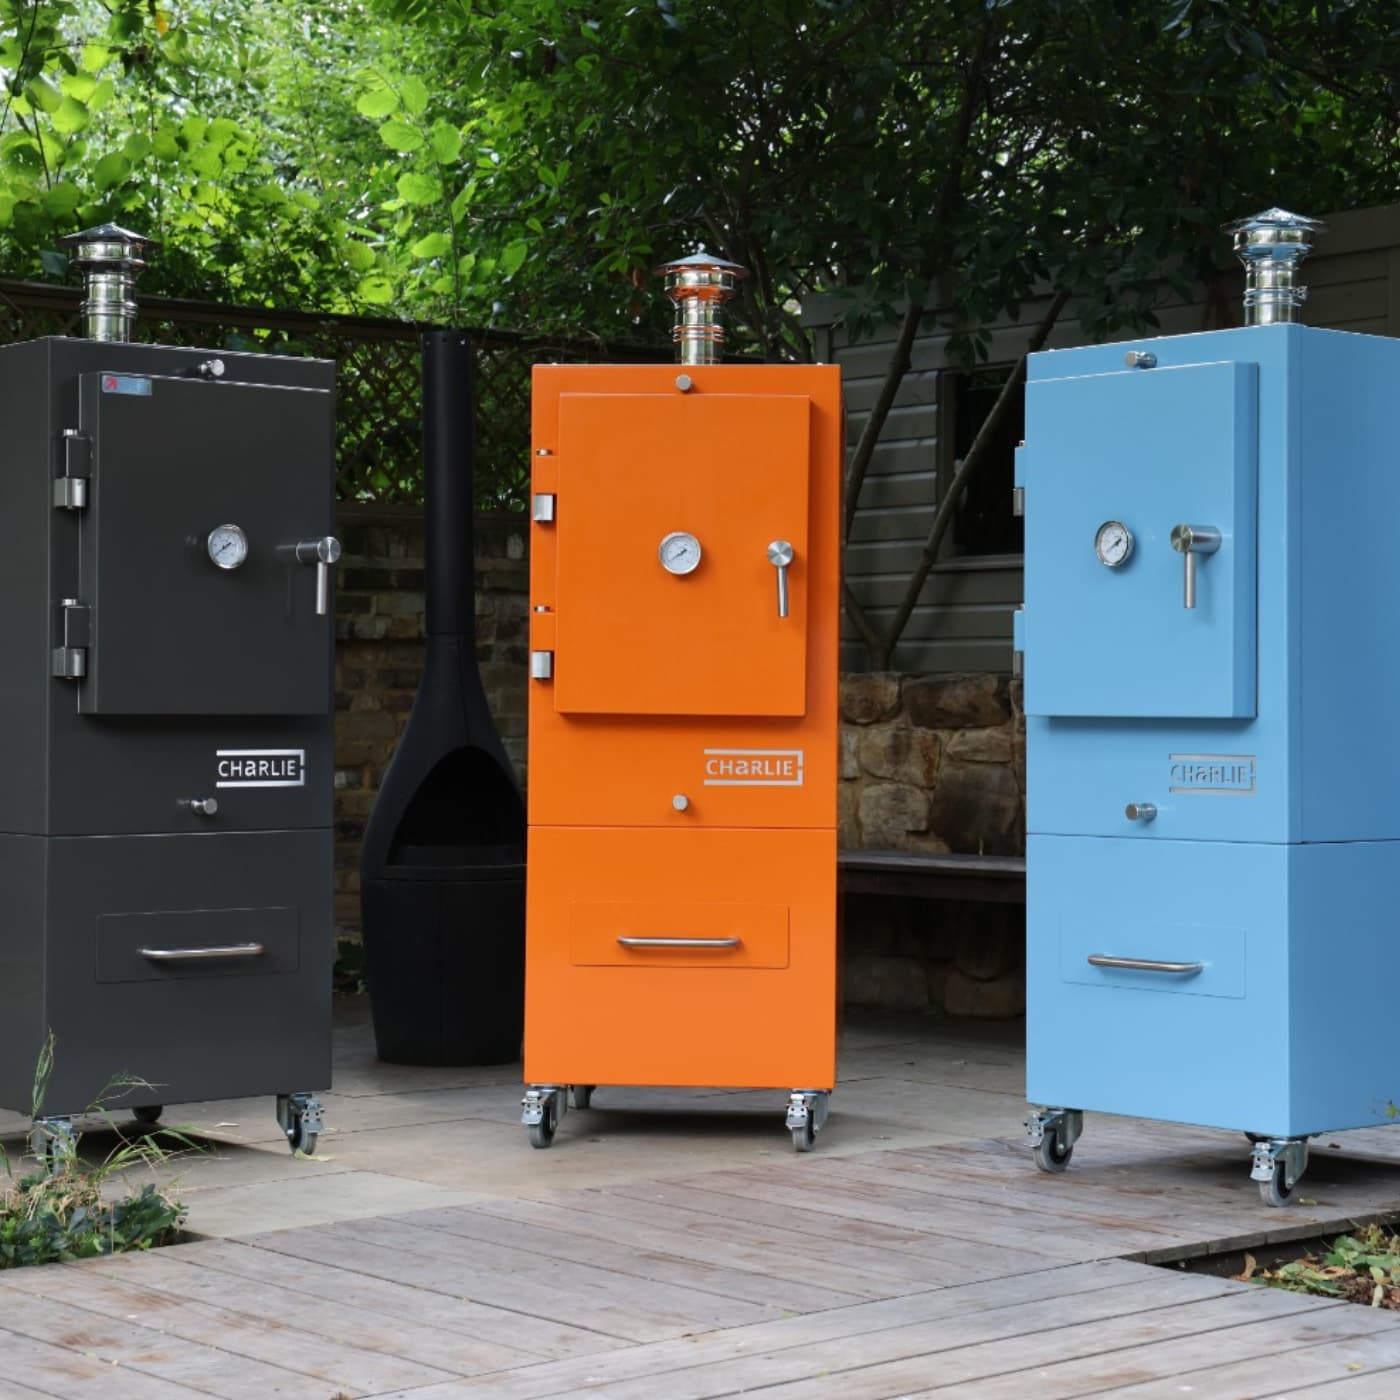 Charlie Oven comes in a range of 10 beautiful colours.  There is a colour for everyone.  Charlie works as a garden feature, adding a splash of colour all year round.  